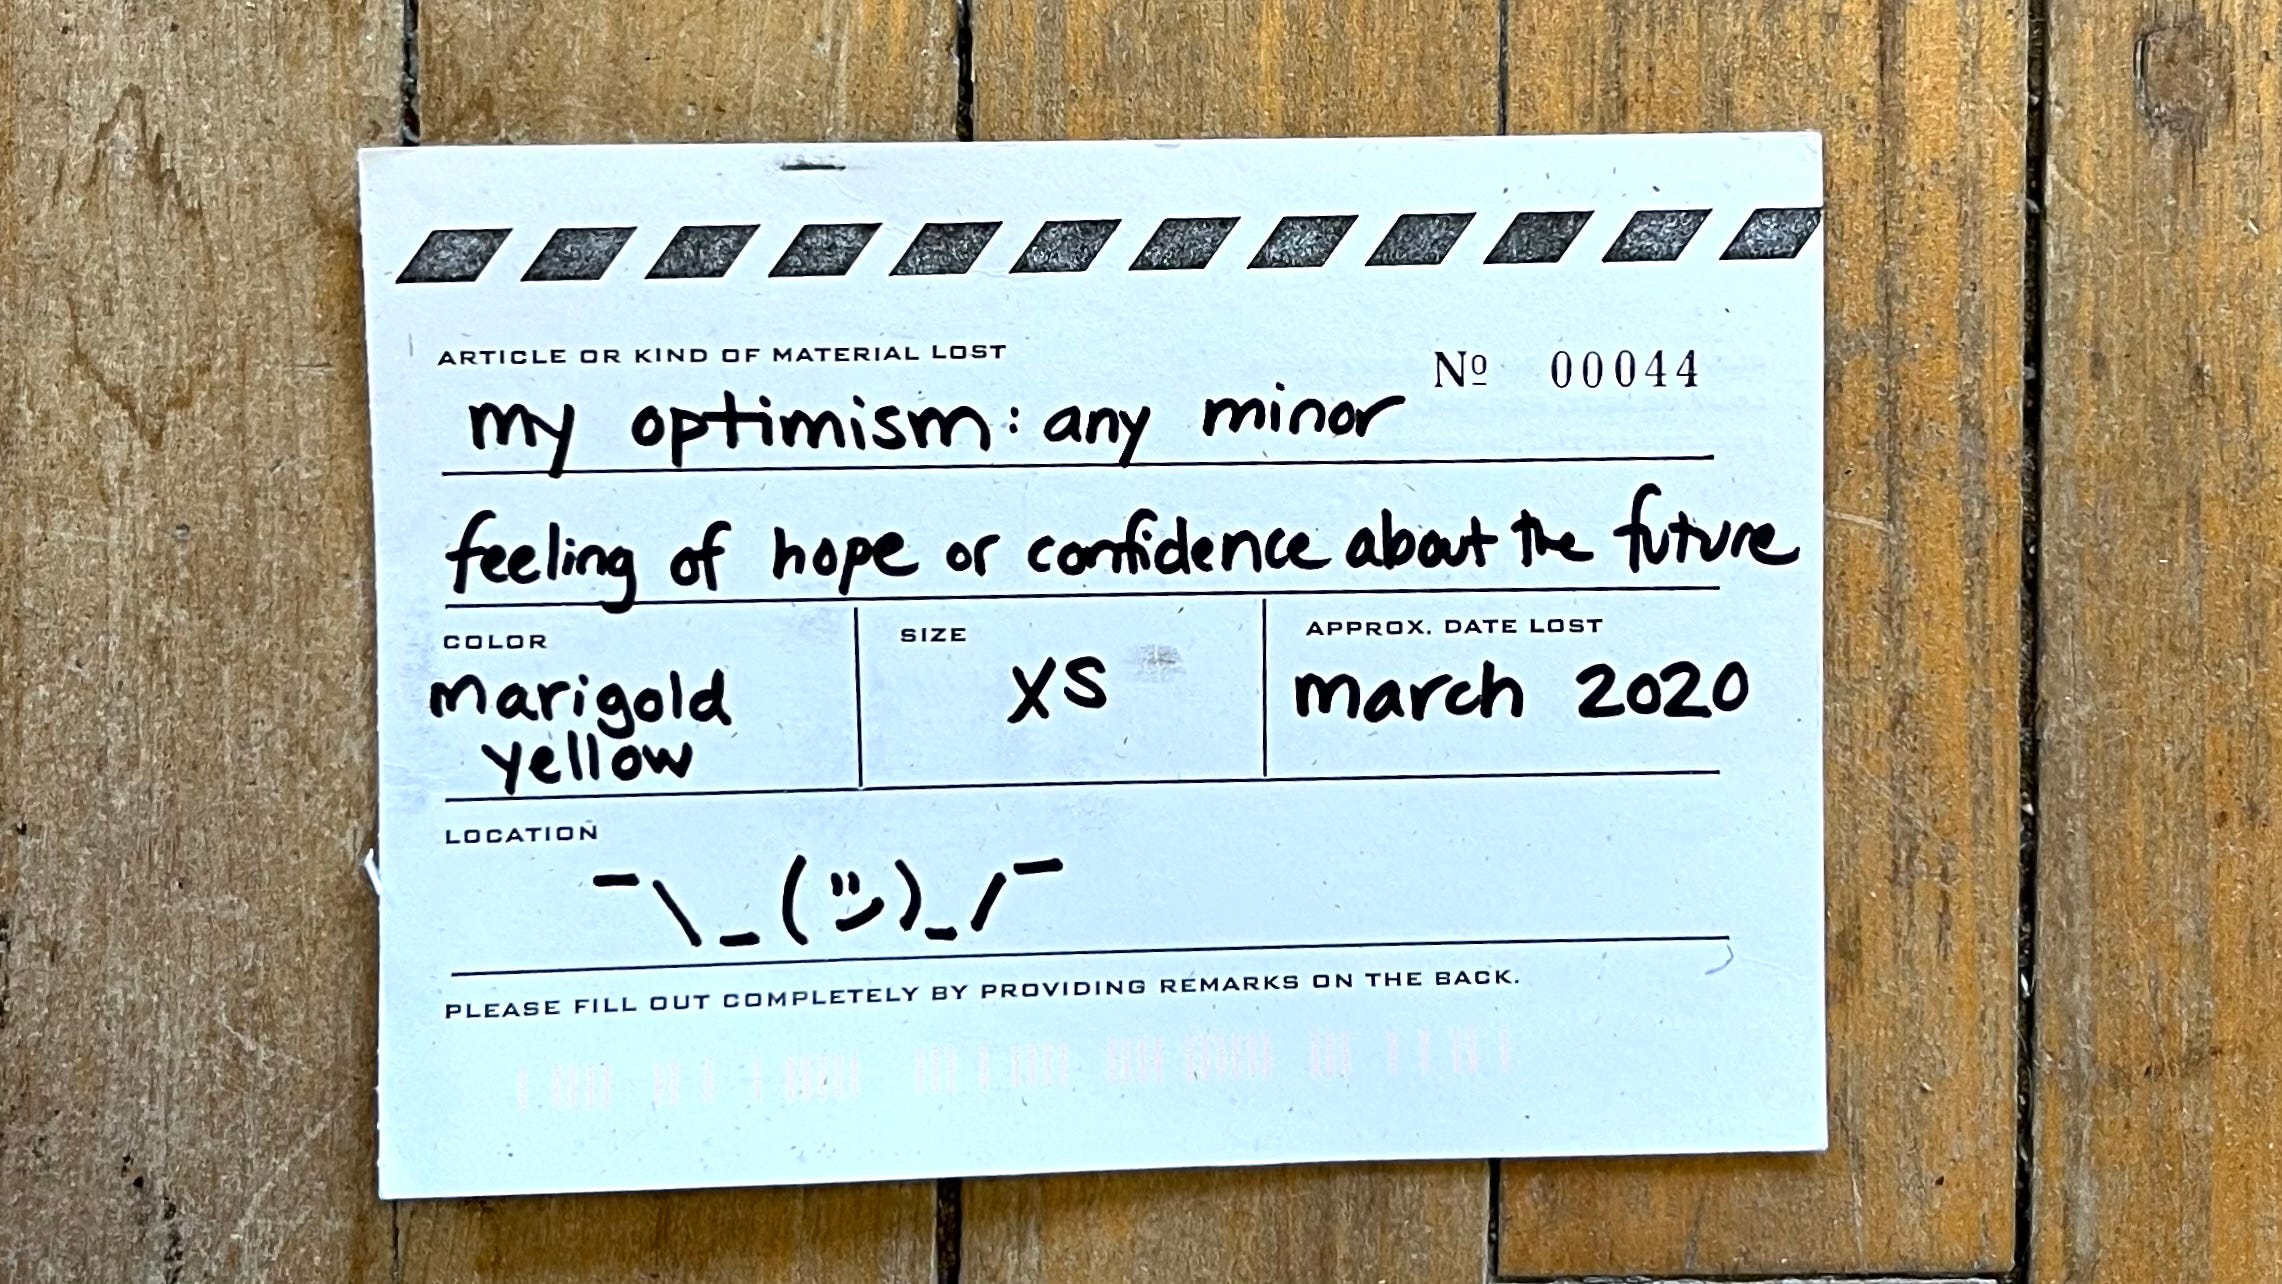 The front of a postcard designed to look like a lost article tag. Under article or kind of material lost it says in handwriting "my optimism: any minor feeling of hope or confidence about the future". Under color it reads "marigold yellow" and under size it says "xs". Approx. date lost reads "march 2020" and under location is the emoticon ¯\_(ツ)_/¯